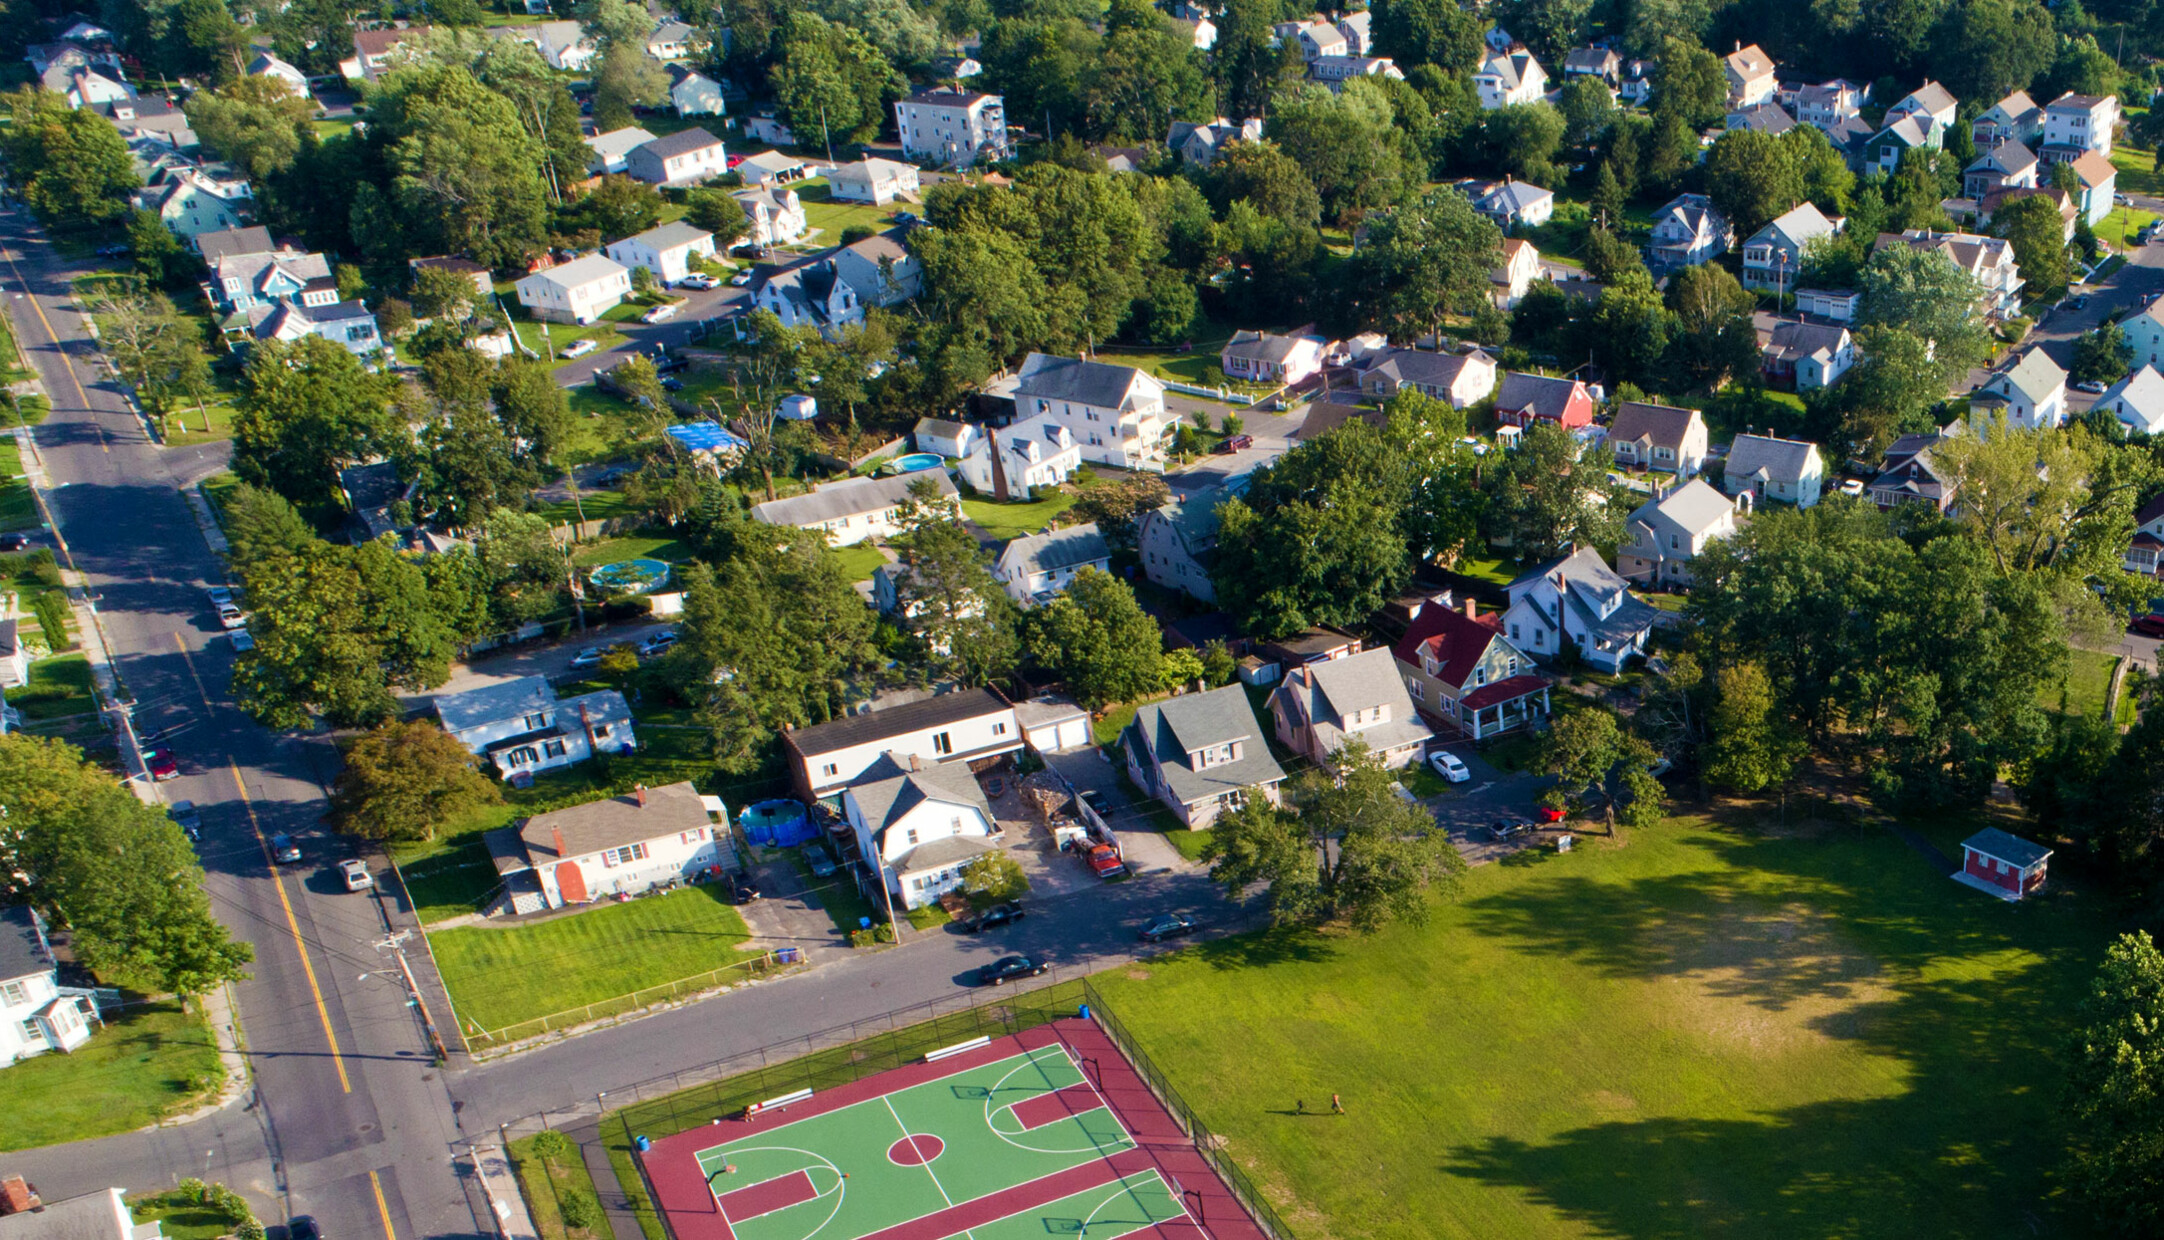 An aerial view of houses and streets in the Hopeville Park neighborhood in Waterbury